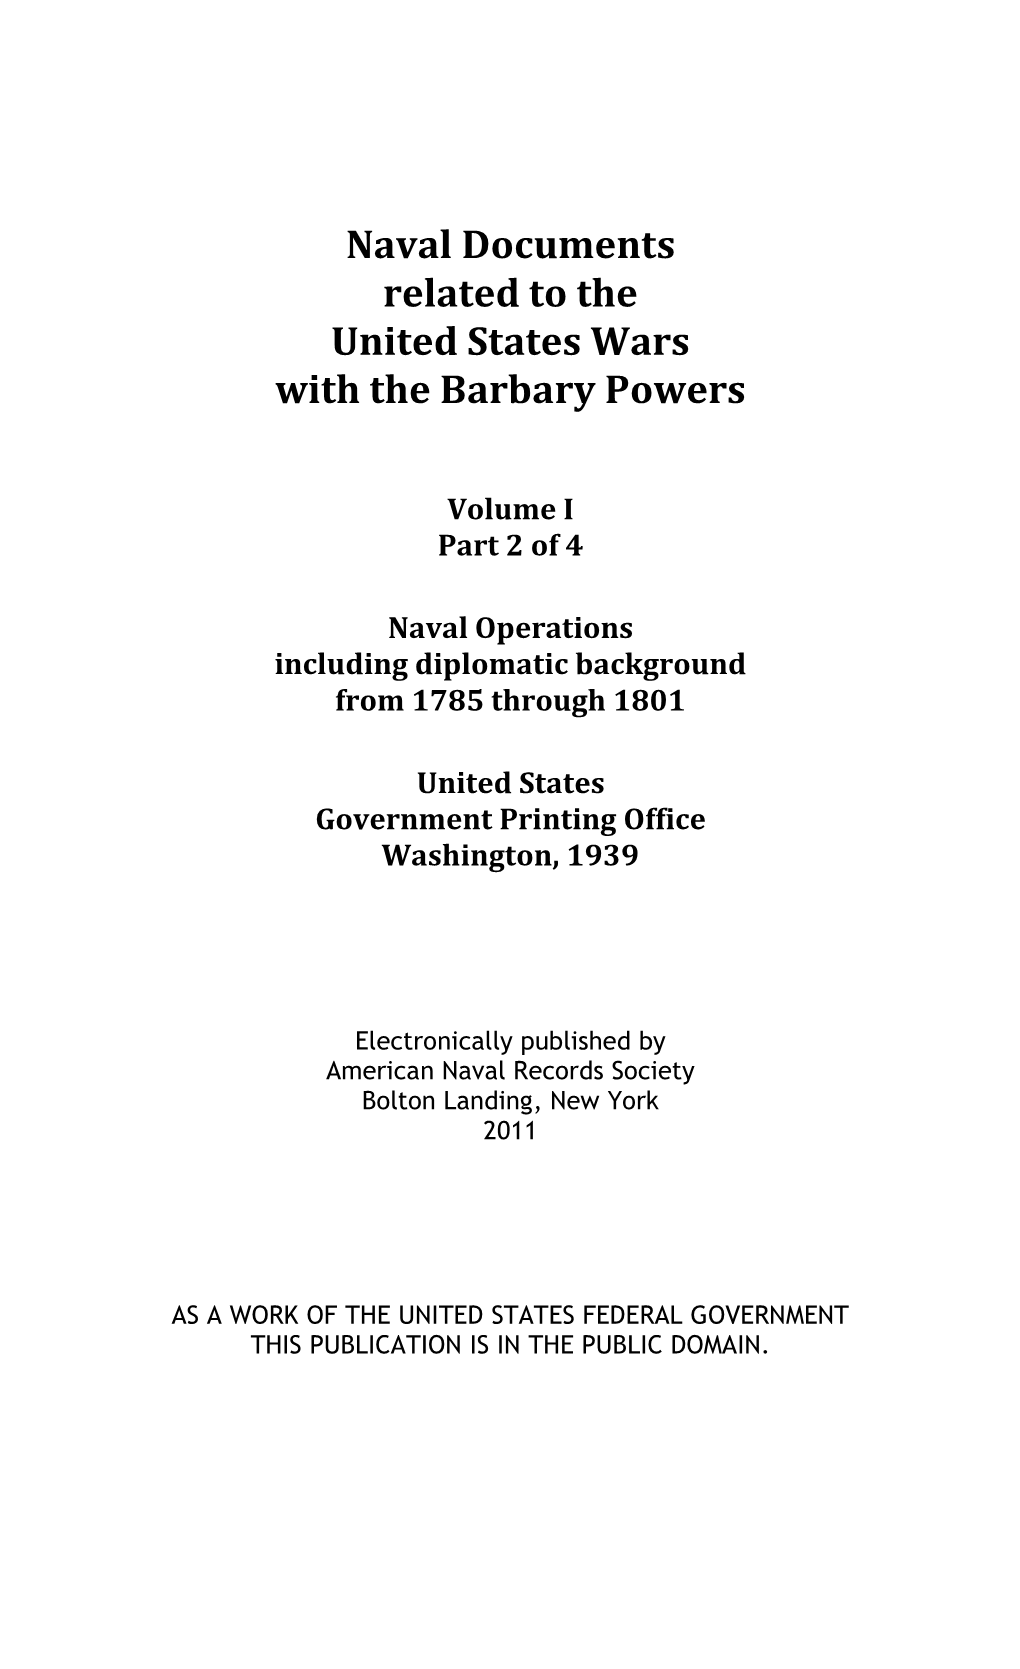 Wars with the Barbary Powers, Volume I Part 2